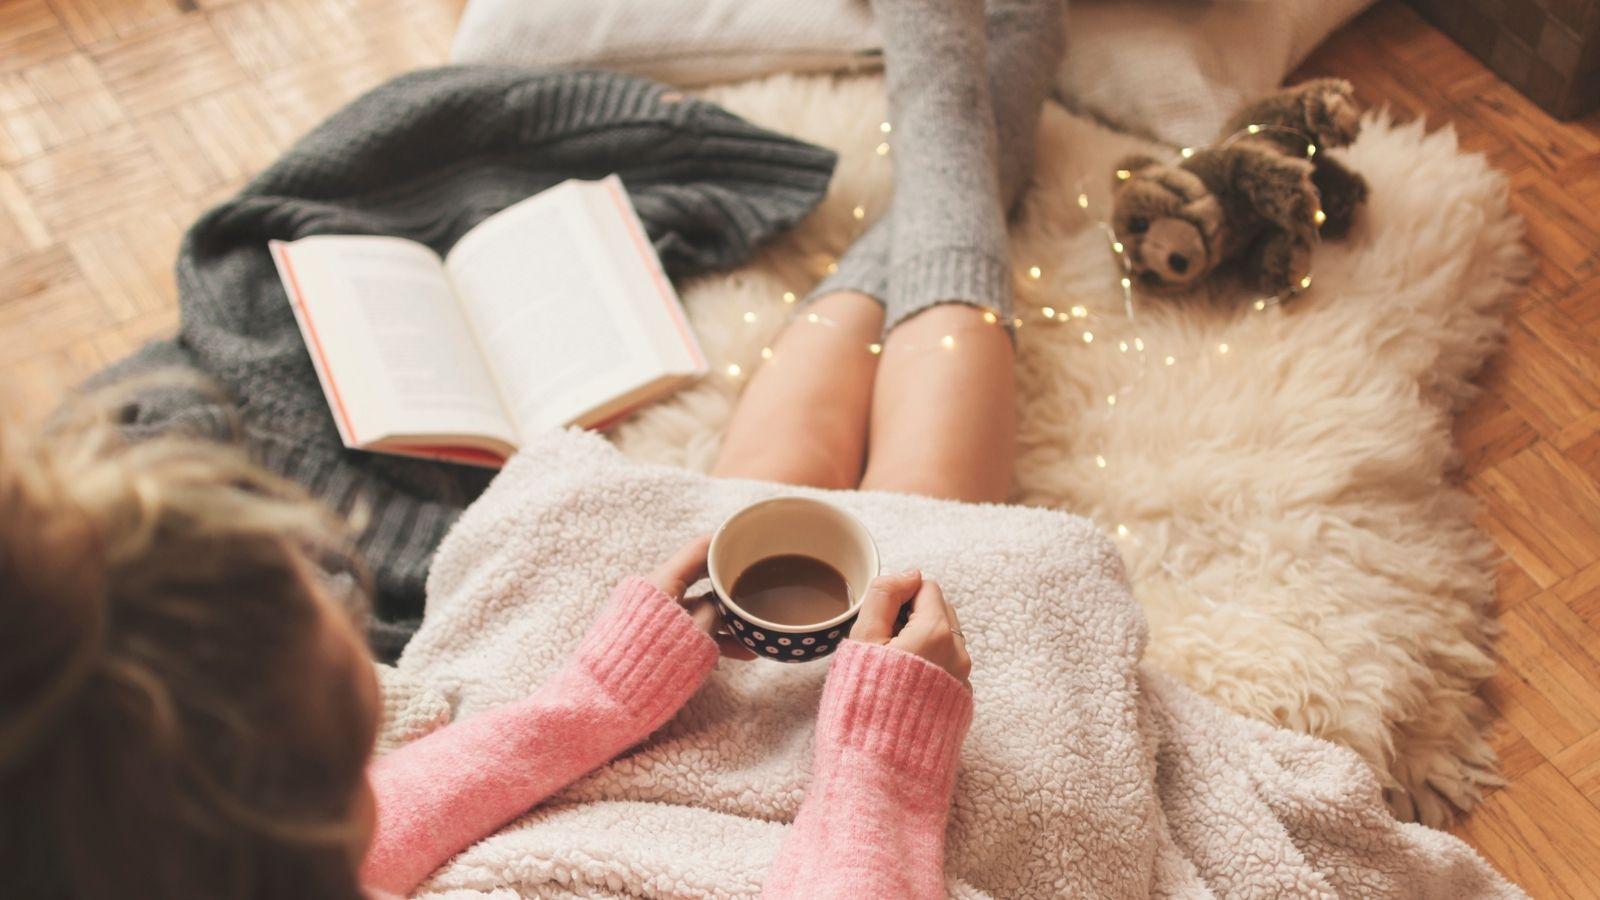 Slow down and have an early night. Image shows picture of a woman in fluffy socks with a book and a hot drink